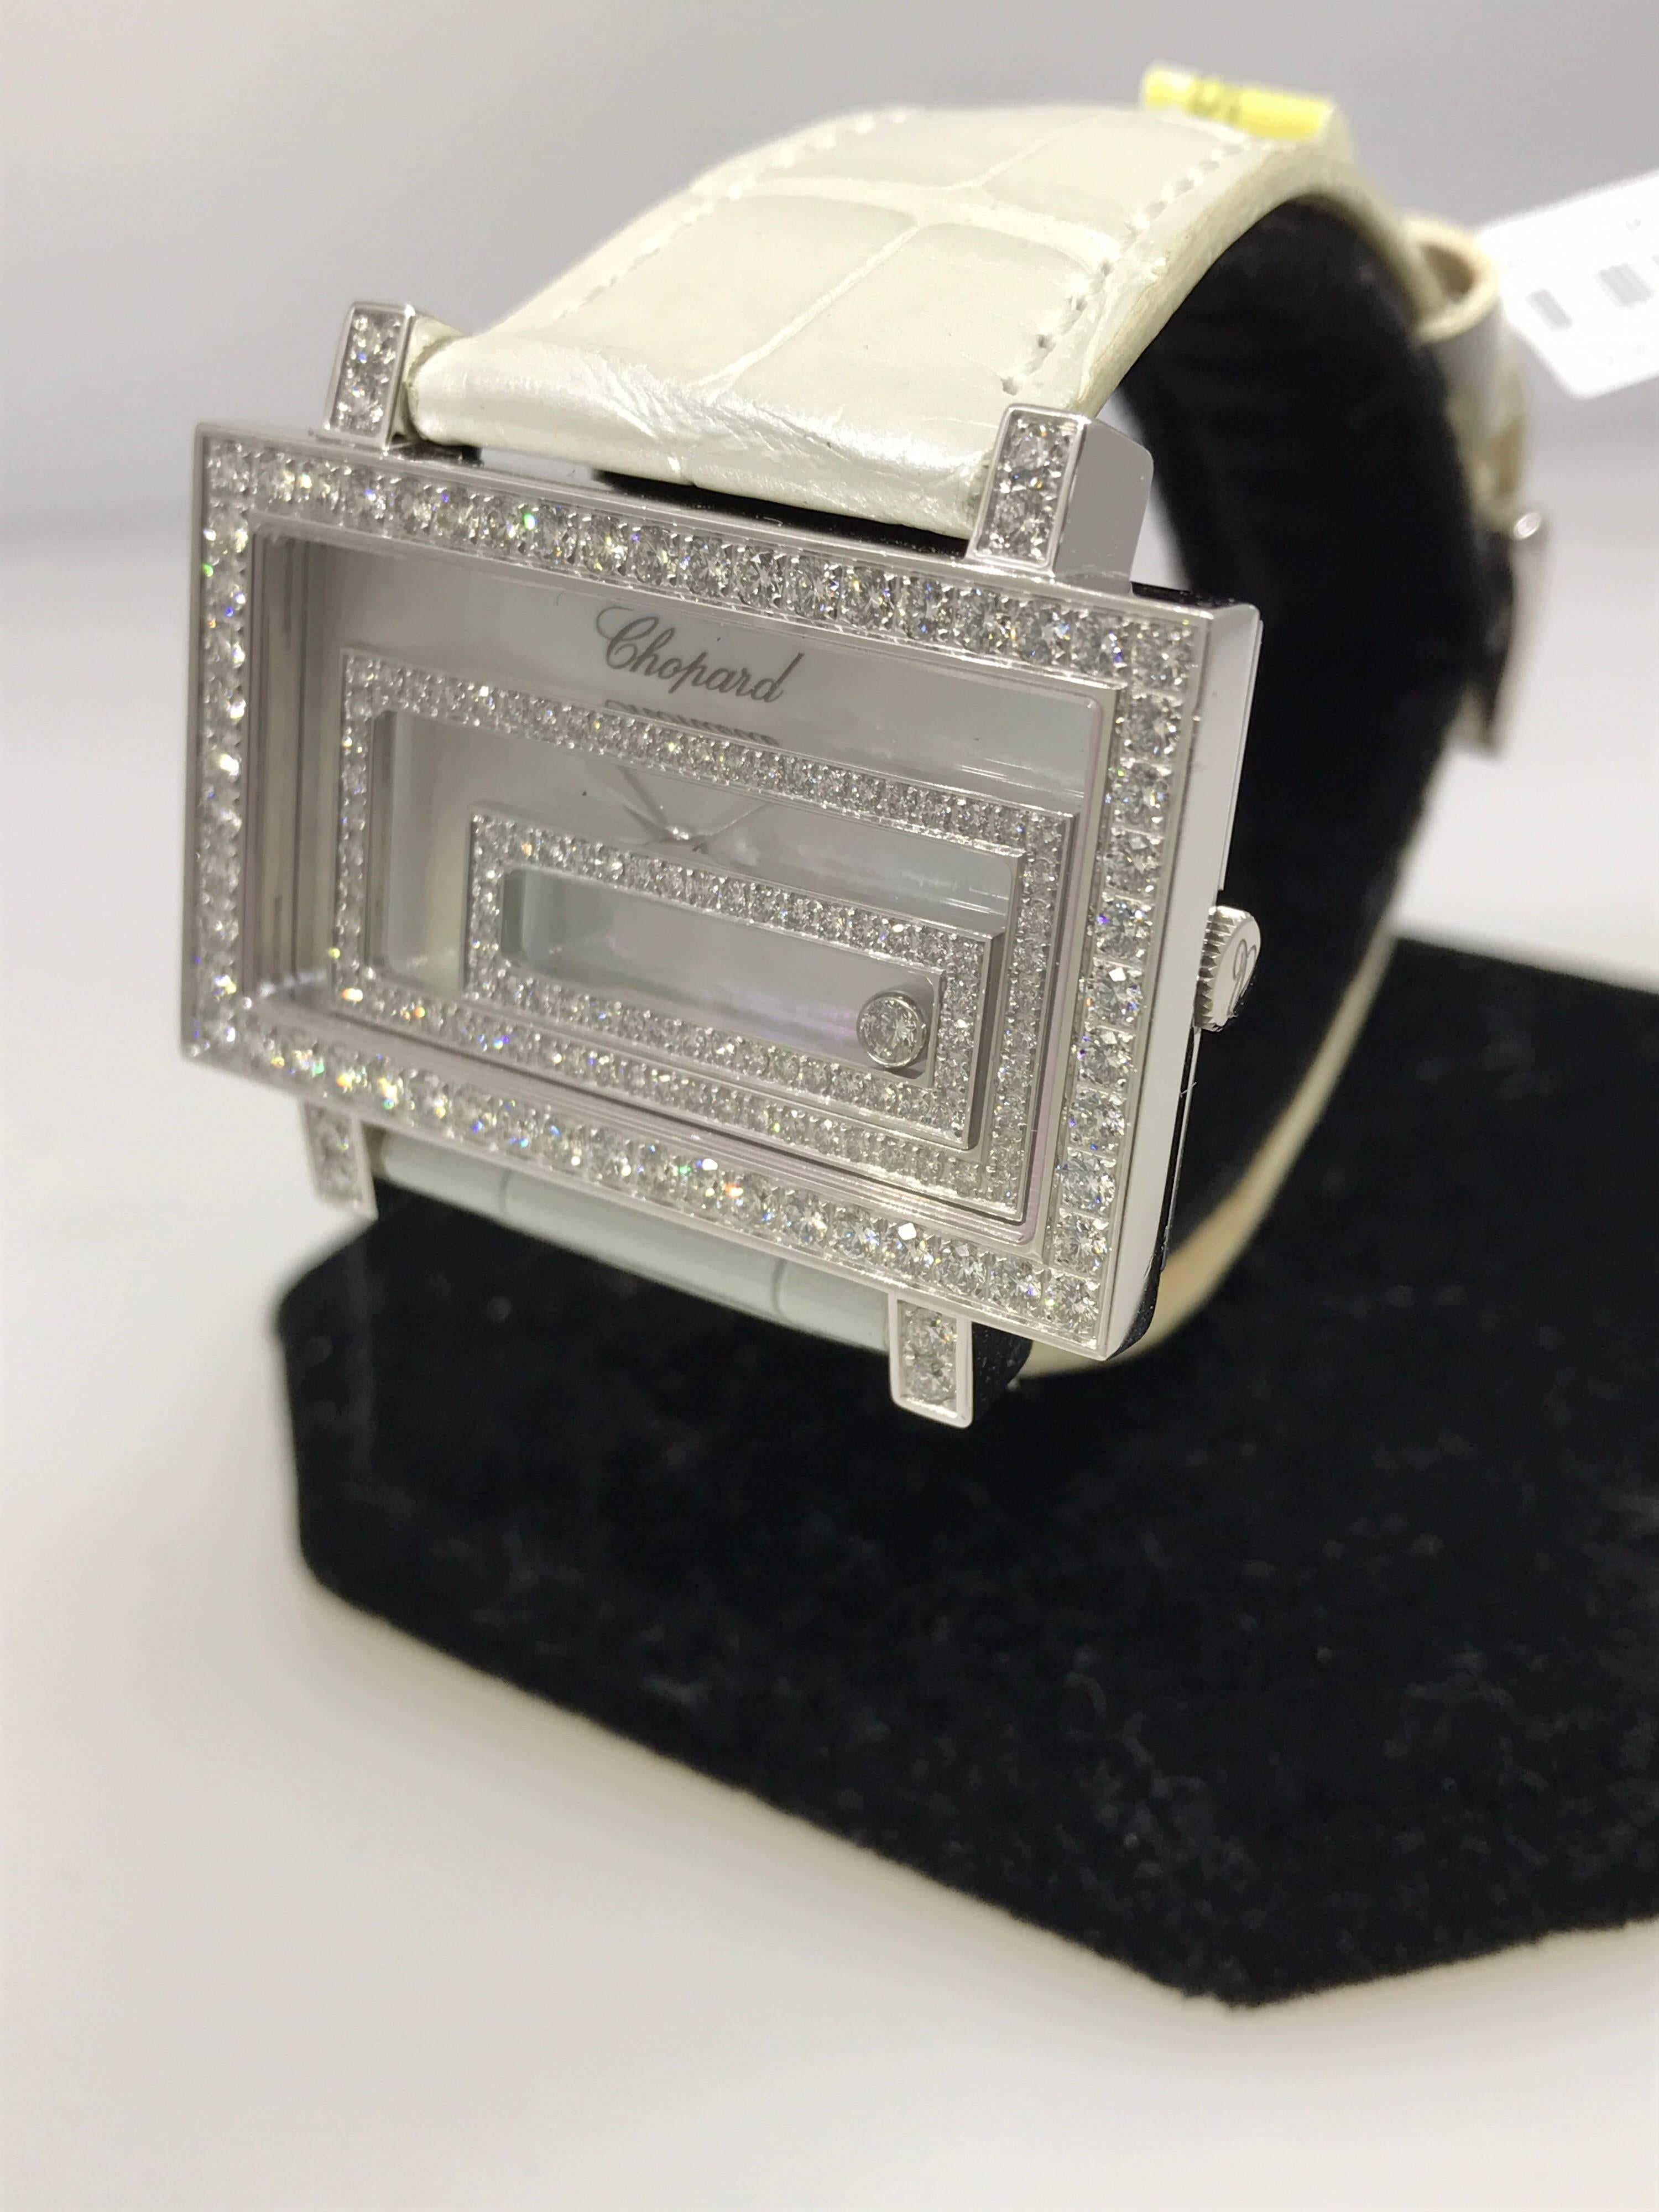 Chopard Happy Spirit 18 Karat White Gold Pave Diamond Leather Band Ladies Watch

Model Number: 20/9168-1001

100% Authentic

Brand New

Comes with original Chopard box, certificate of authenticity and warranty, and instruction manual

18 Karat White